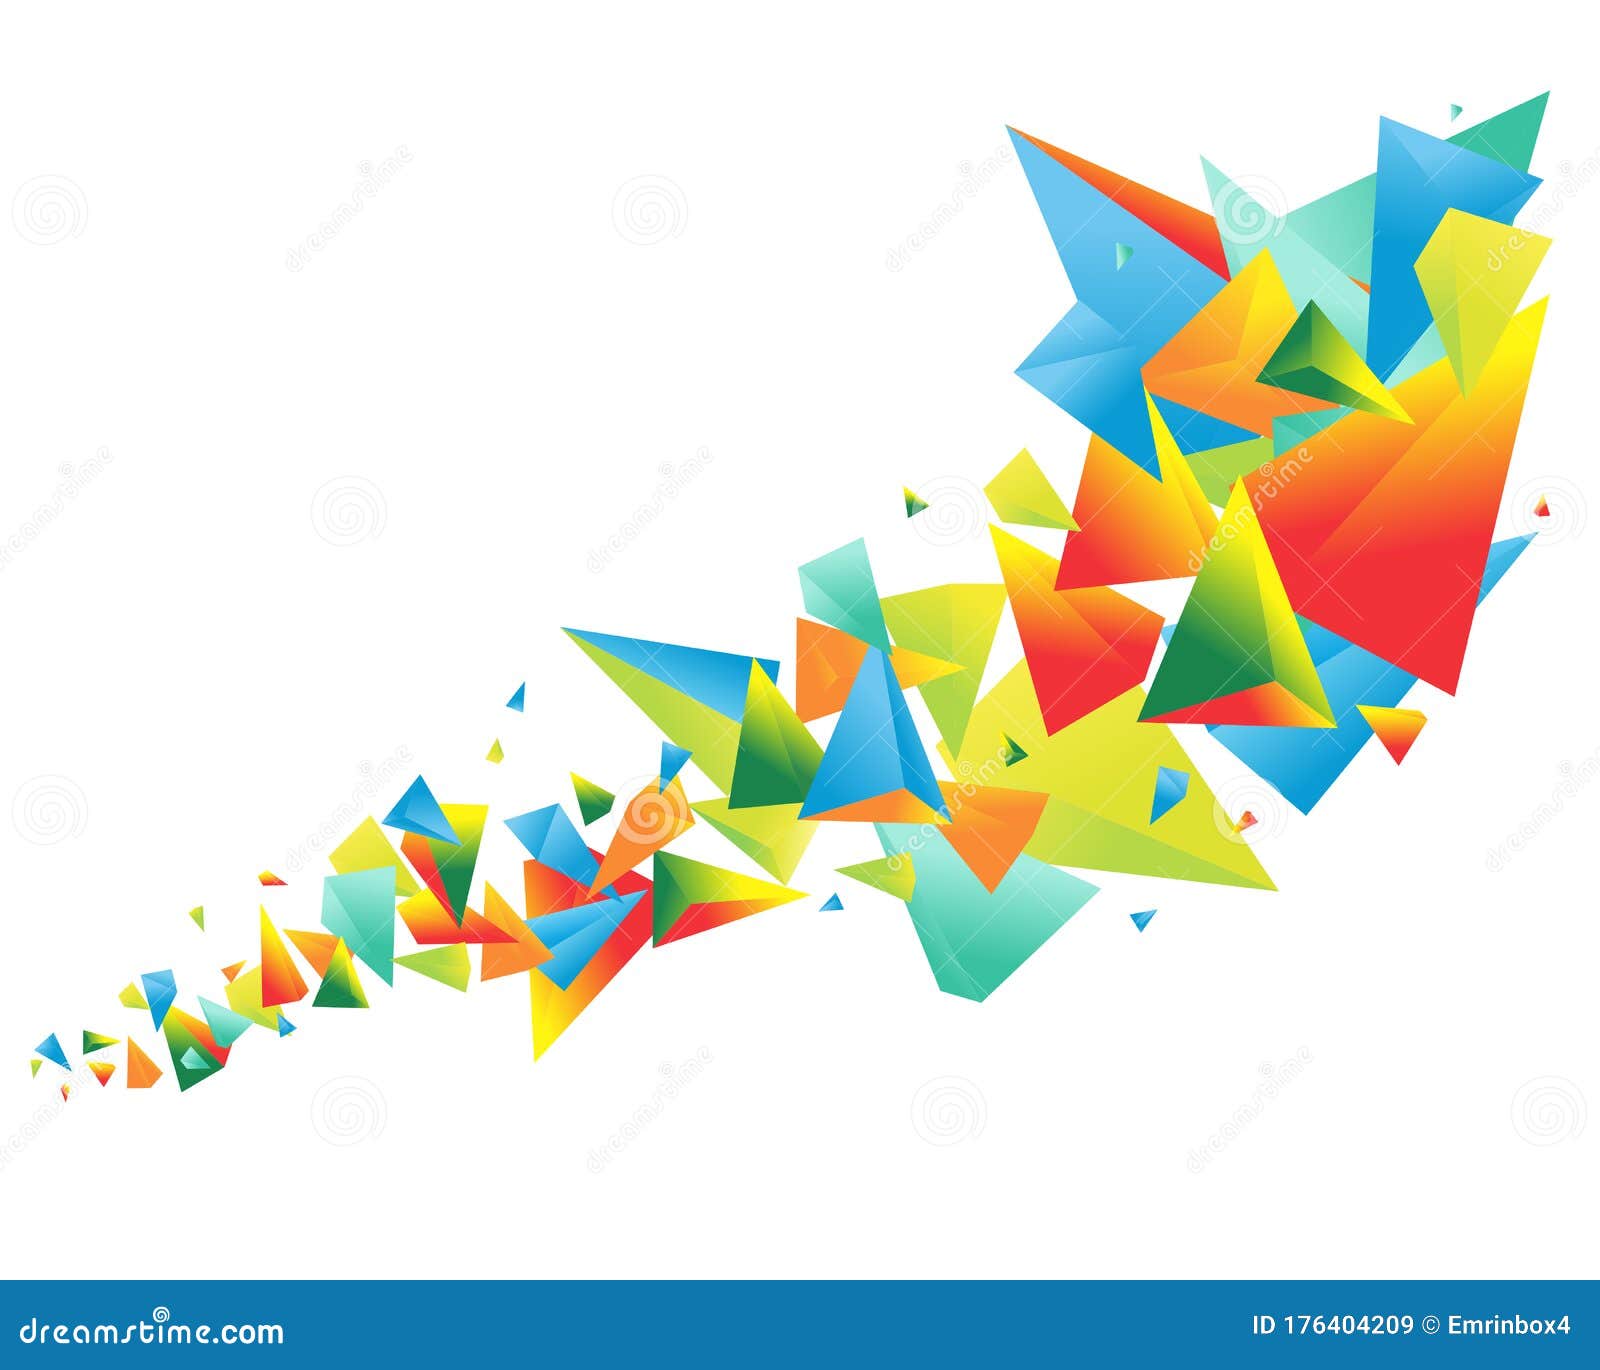 Abstract Spread Prism Background Wallpaper Stock Illustration Illustration Of Video Powerpoint 176404209